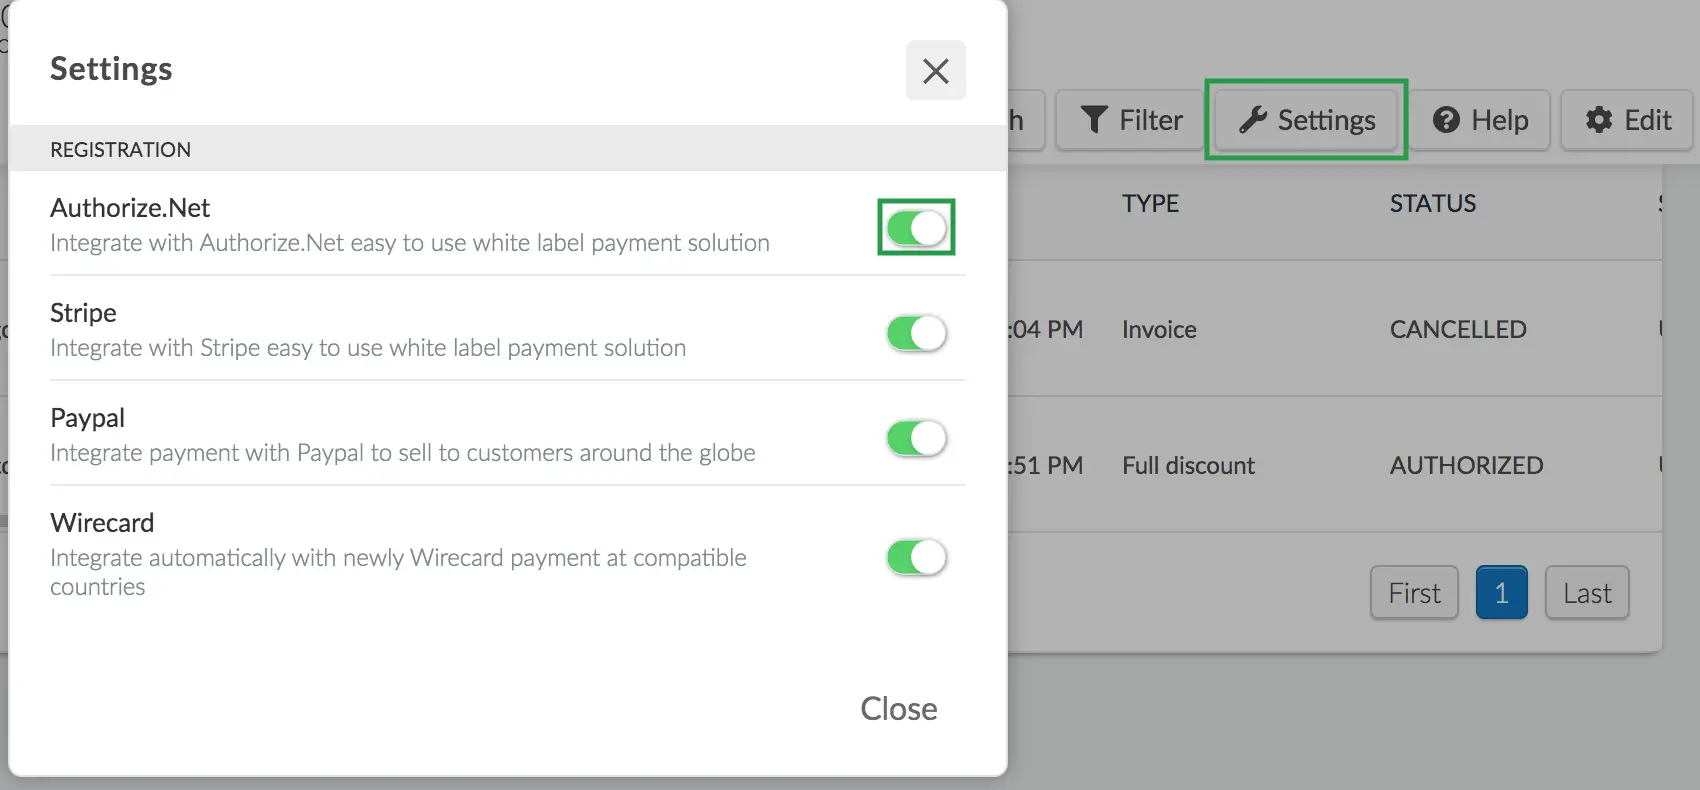 Integrating other payment options